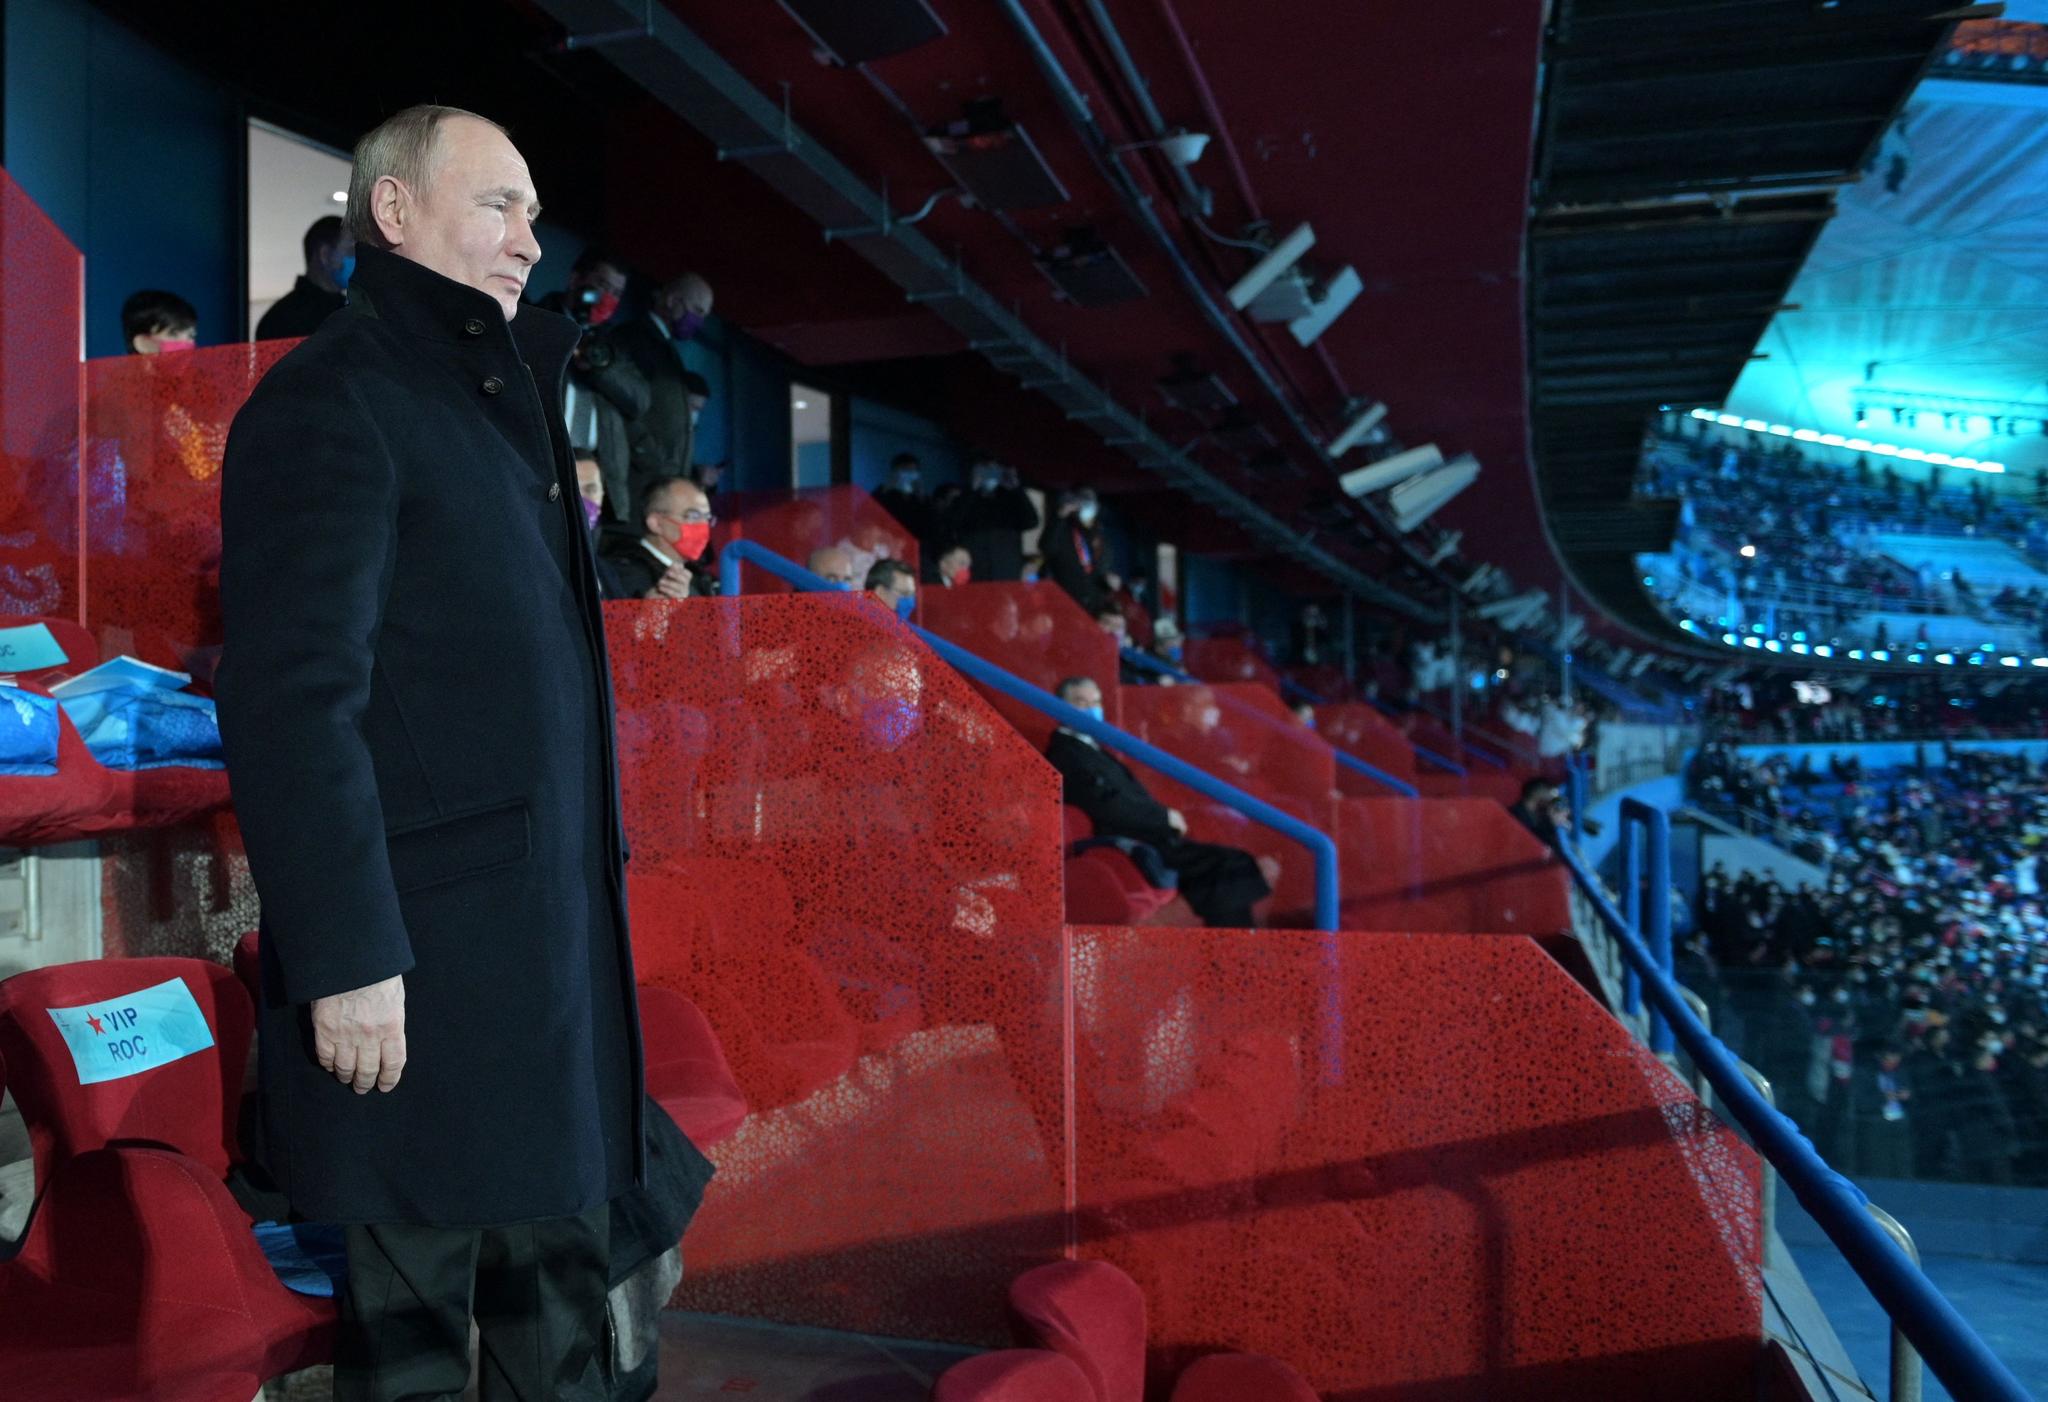 This is how international sport punishes Putin’s Russia